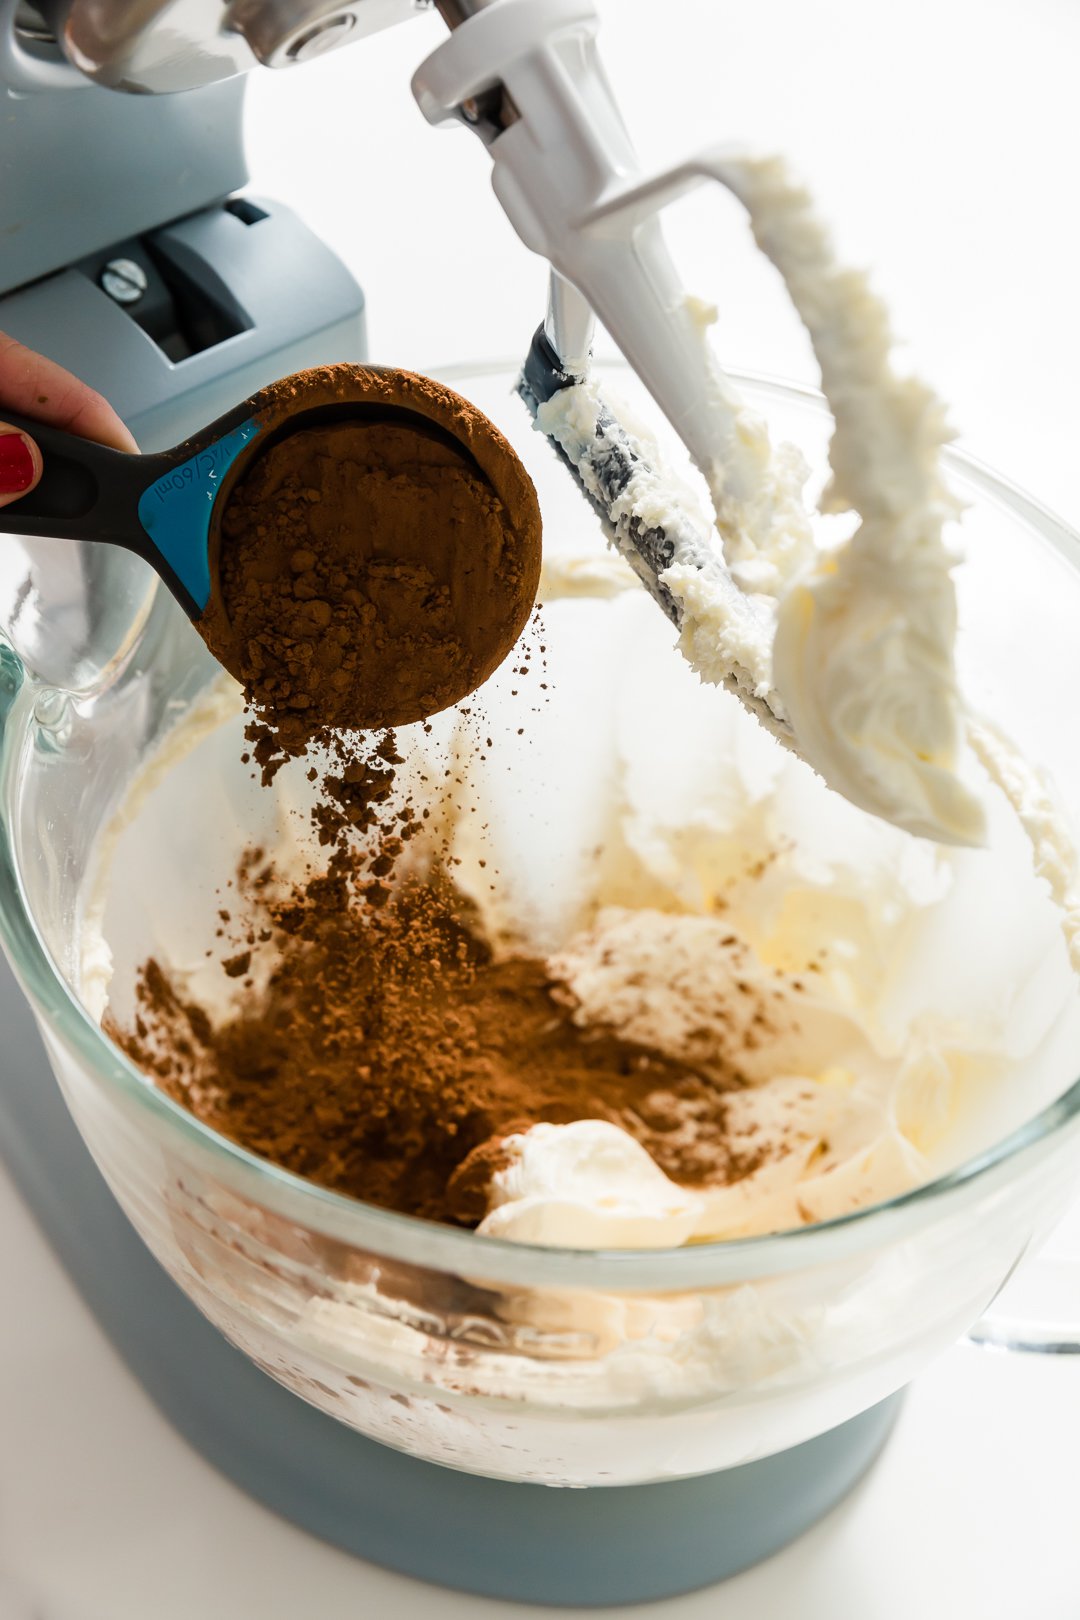 Adding cocoa powder to frosting